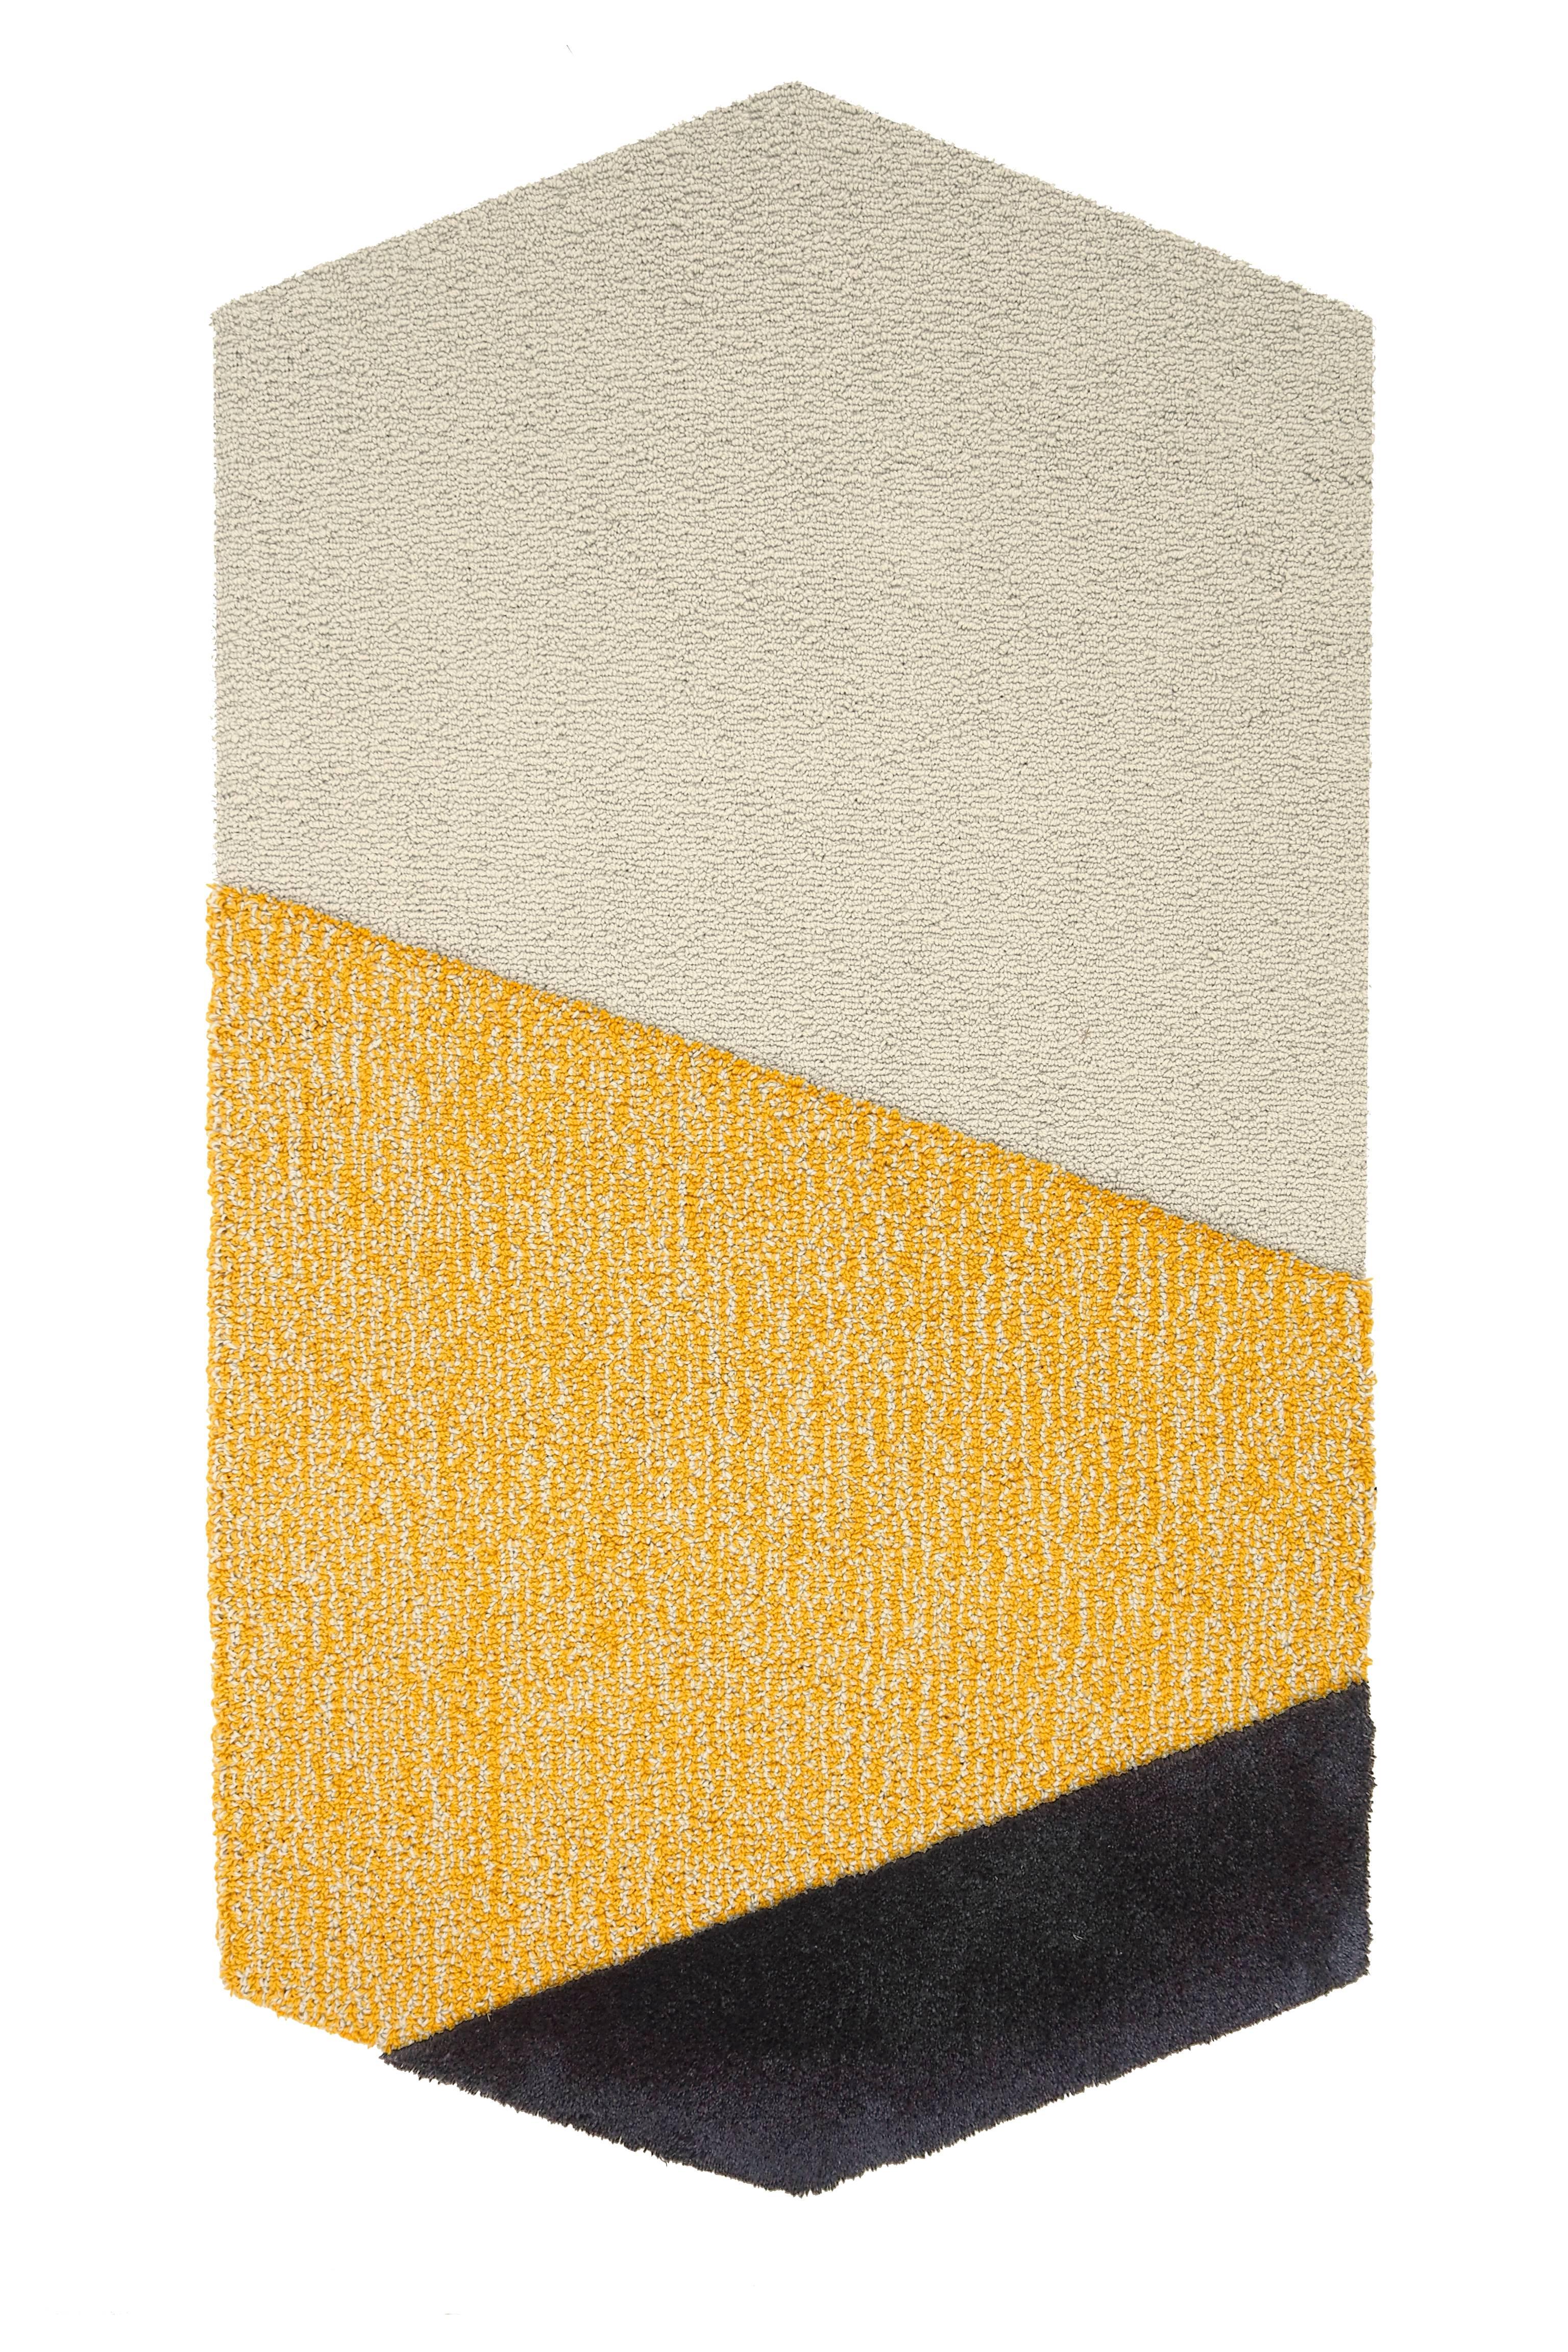 Contemporary Large Yellow Gray Oci Rug Triptych by Seraina Lareida For Sale